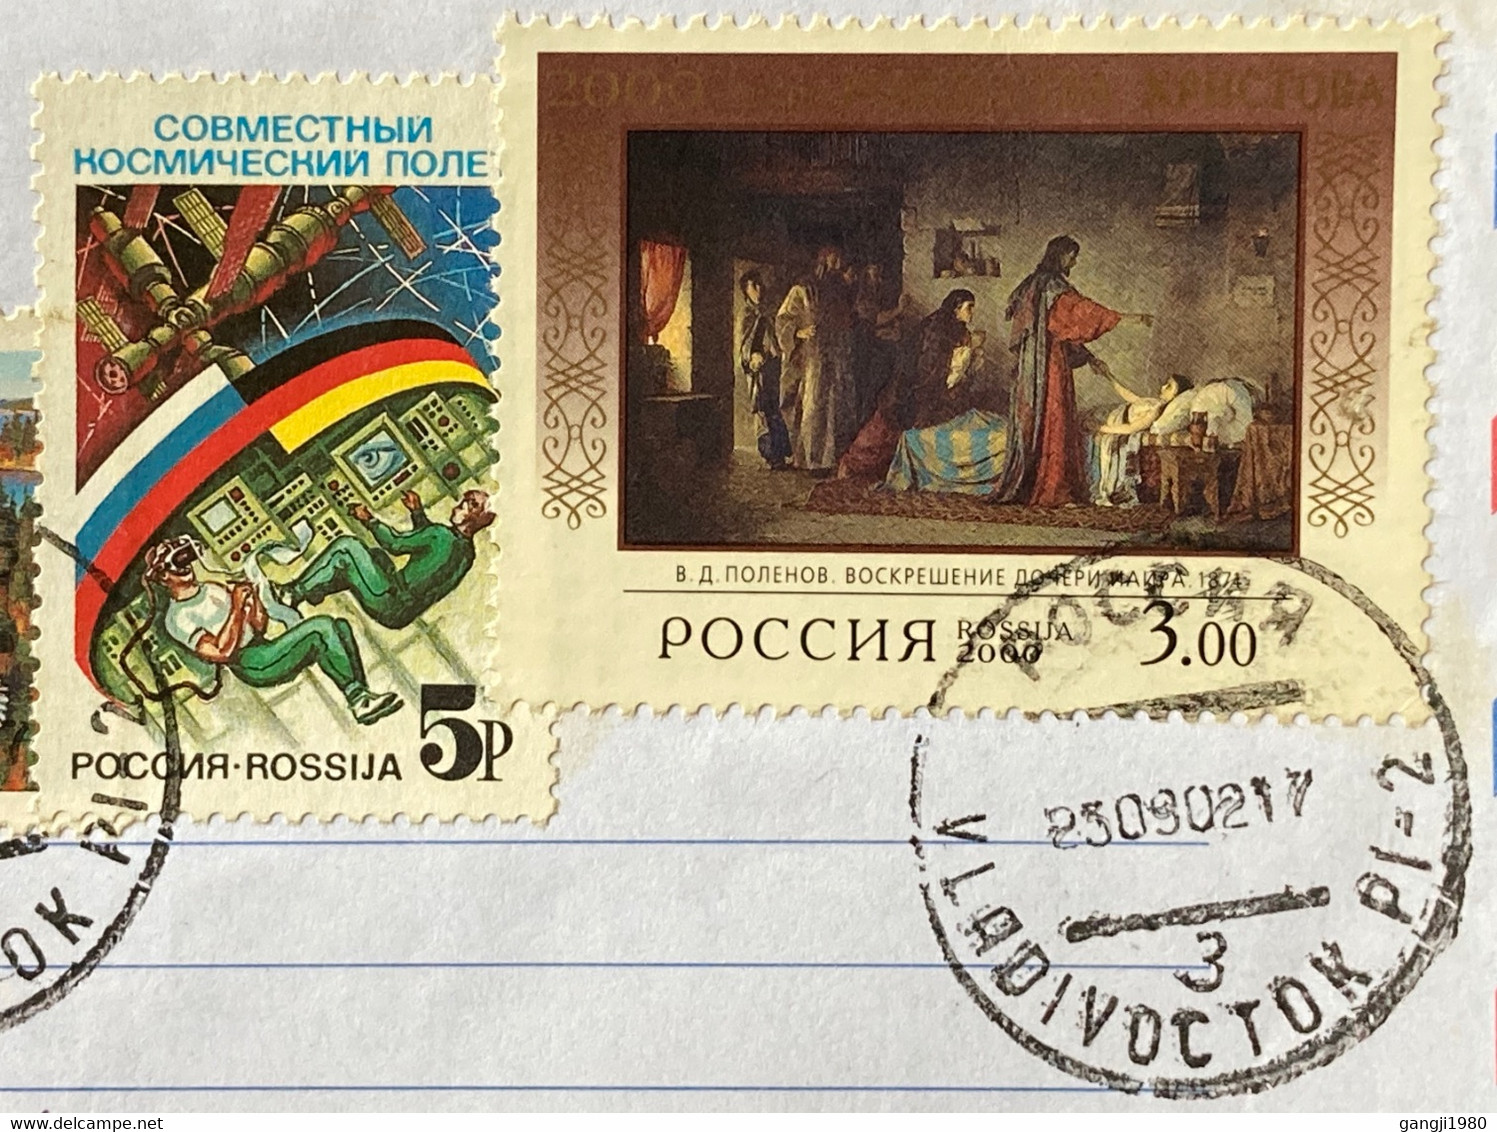 RUSSIA,2002,USED COVER TO INDIA,5 STAMPS,BIRD,SPACE,WALK,ASTRONAUT,ART,PAINTING, VLADIVOSTOK CITY CANCELLATION. - Storia Postale